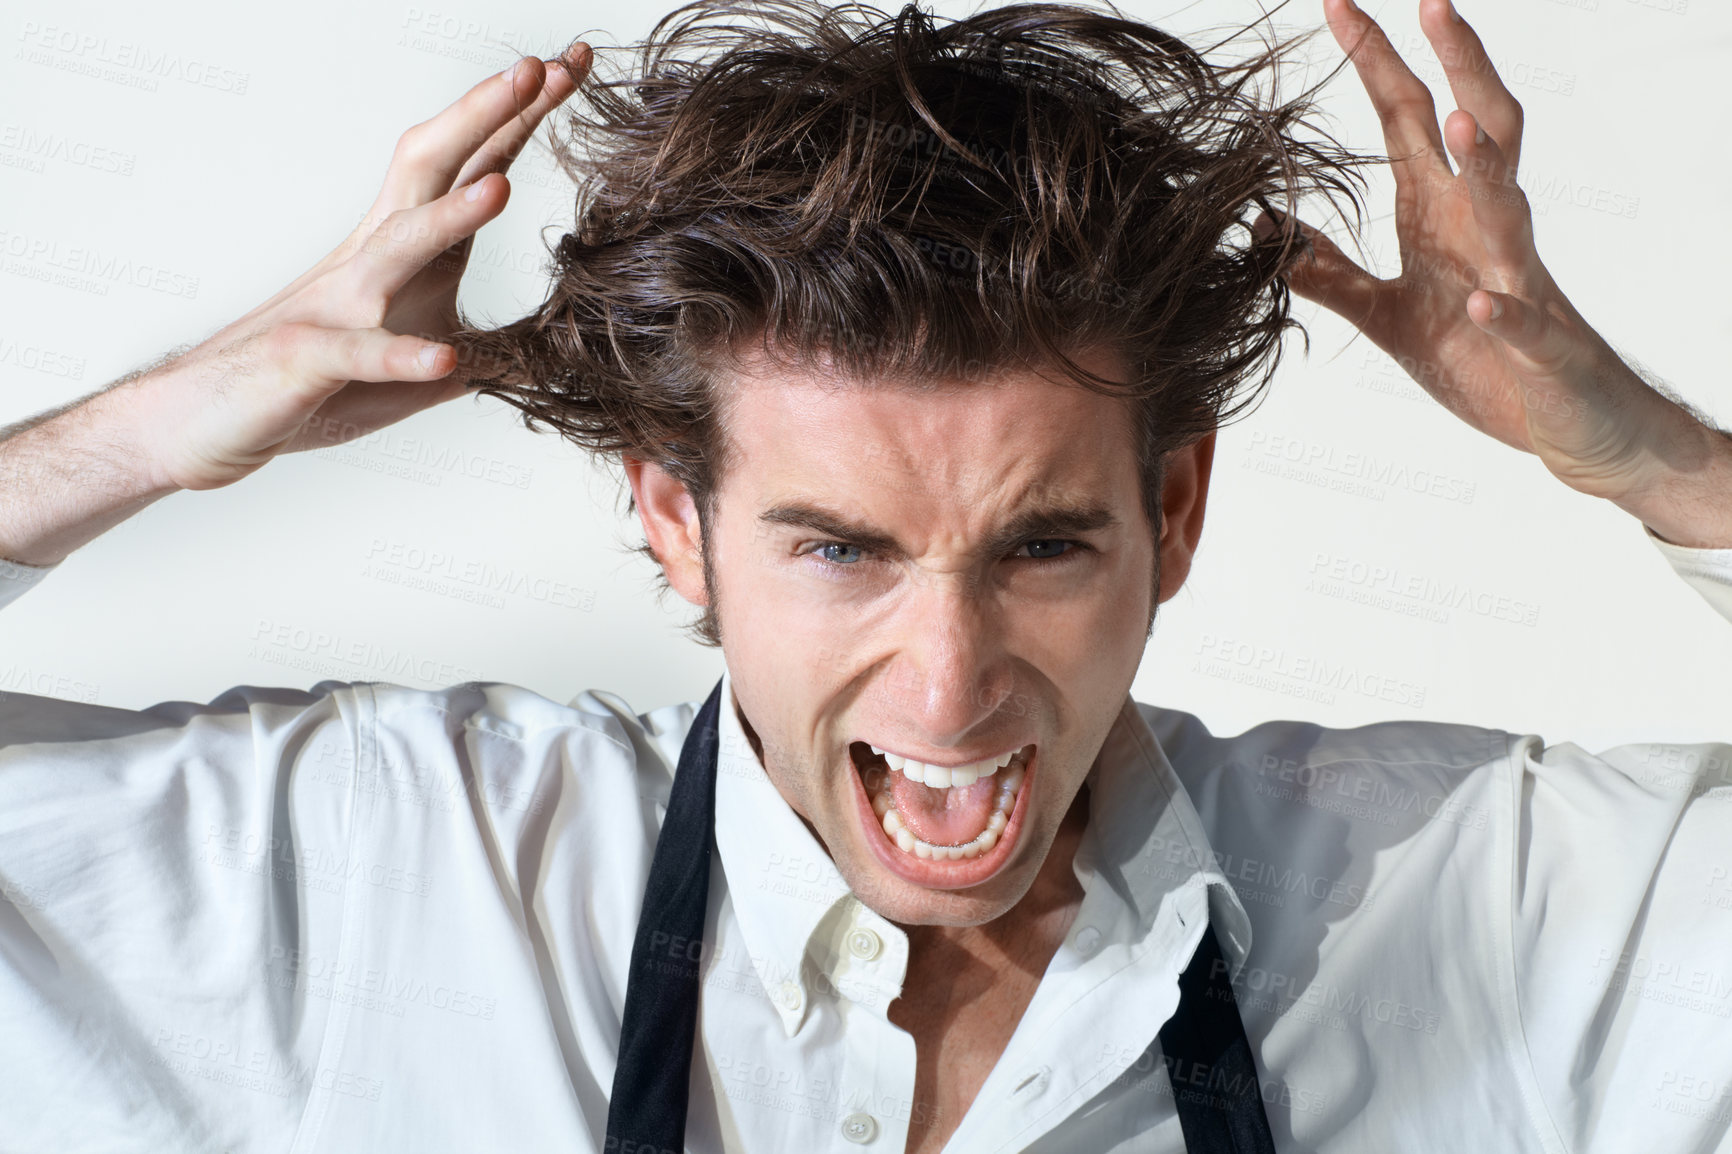 Buy stock photo Crazy, scream and portrait of business man on white background with stress, frustrated and anger. Mental health, depression and face of male worker shouting, stressed out and messy hair in studio